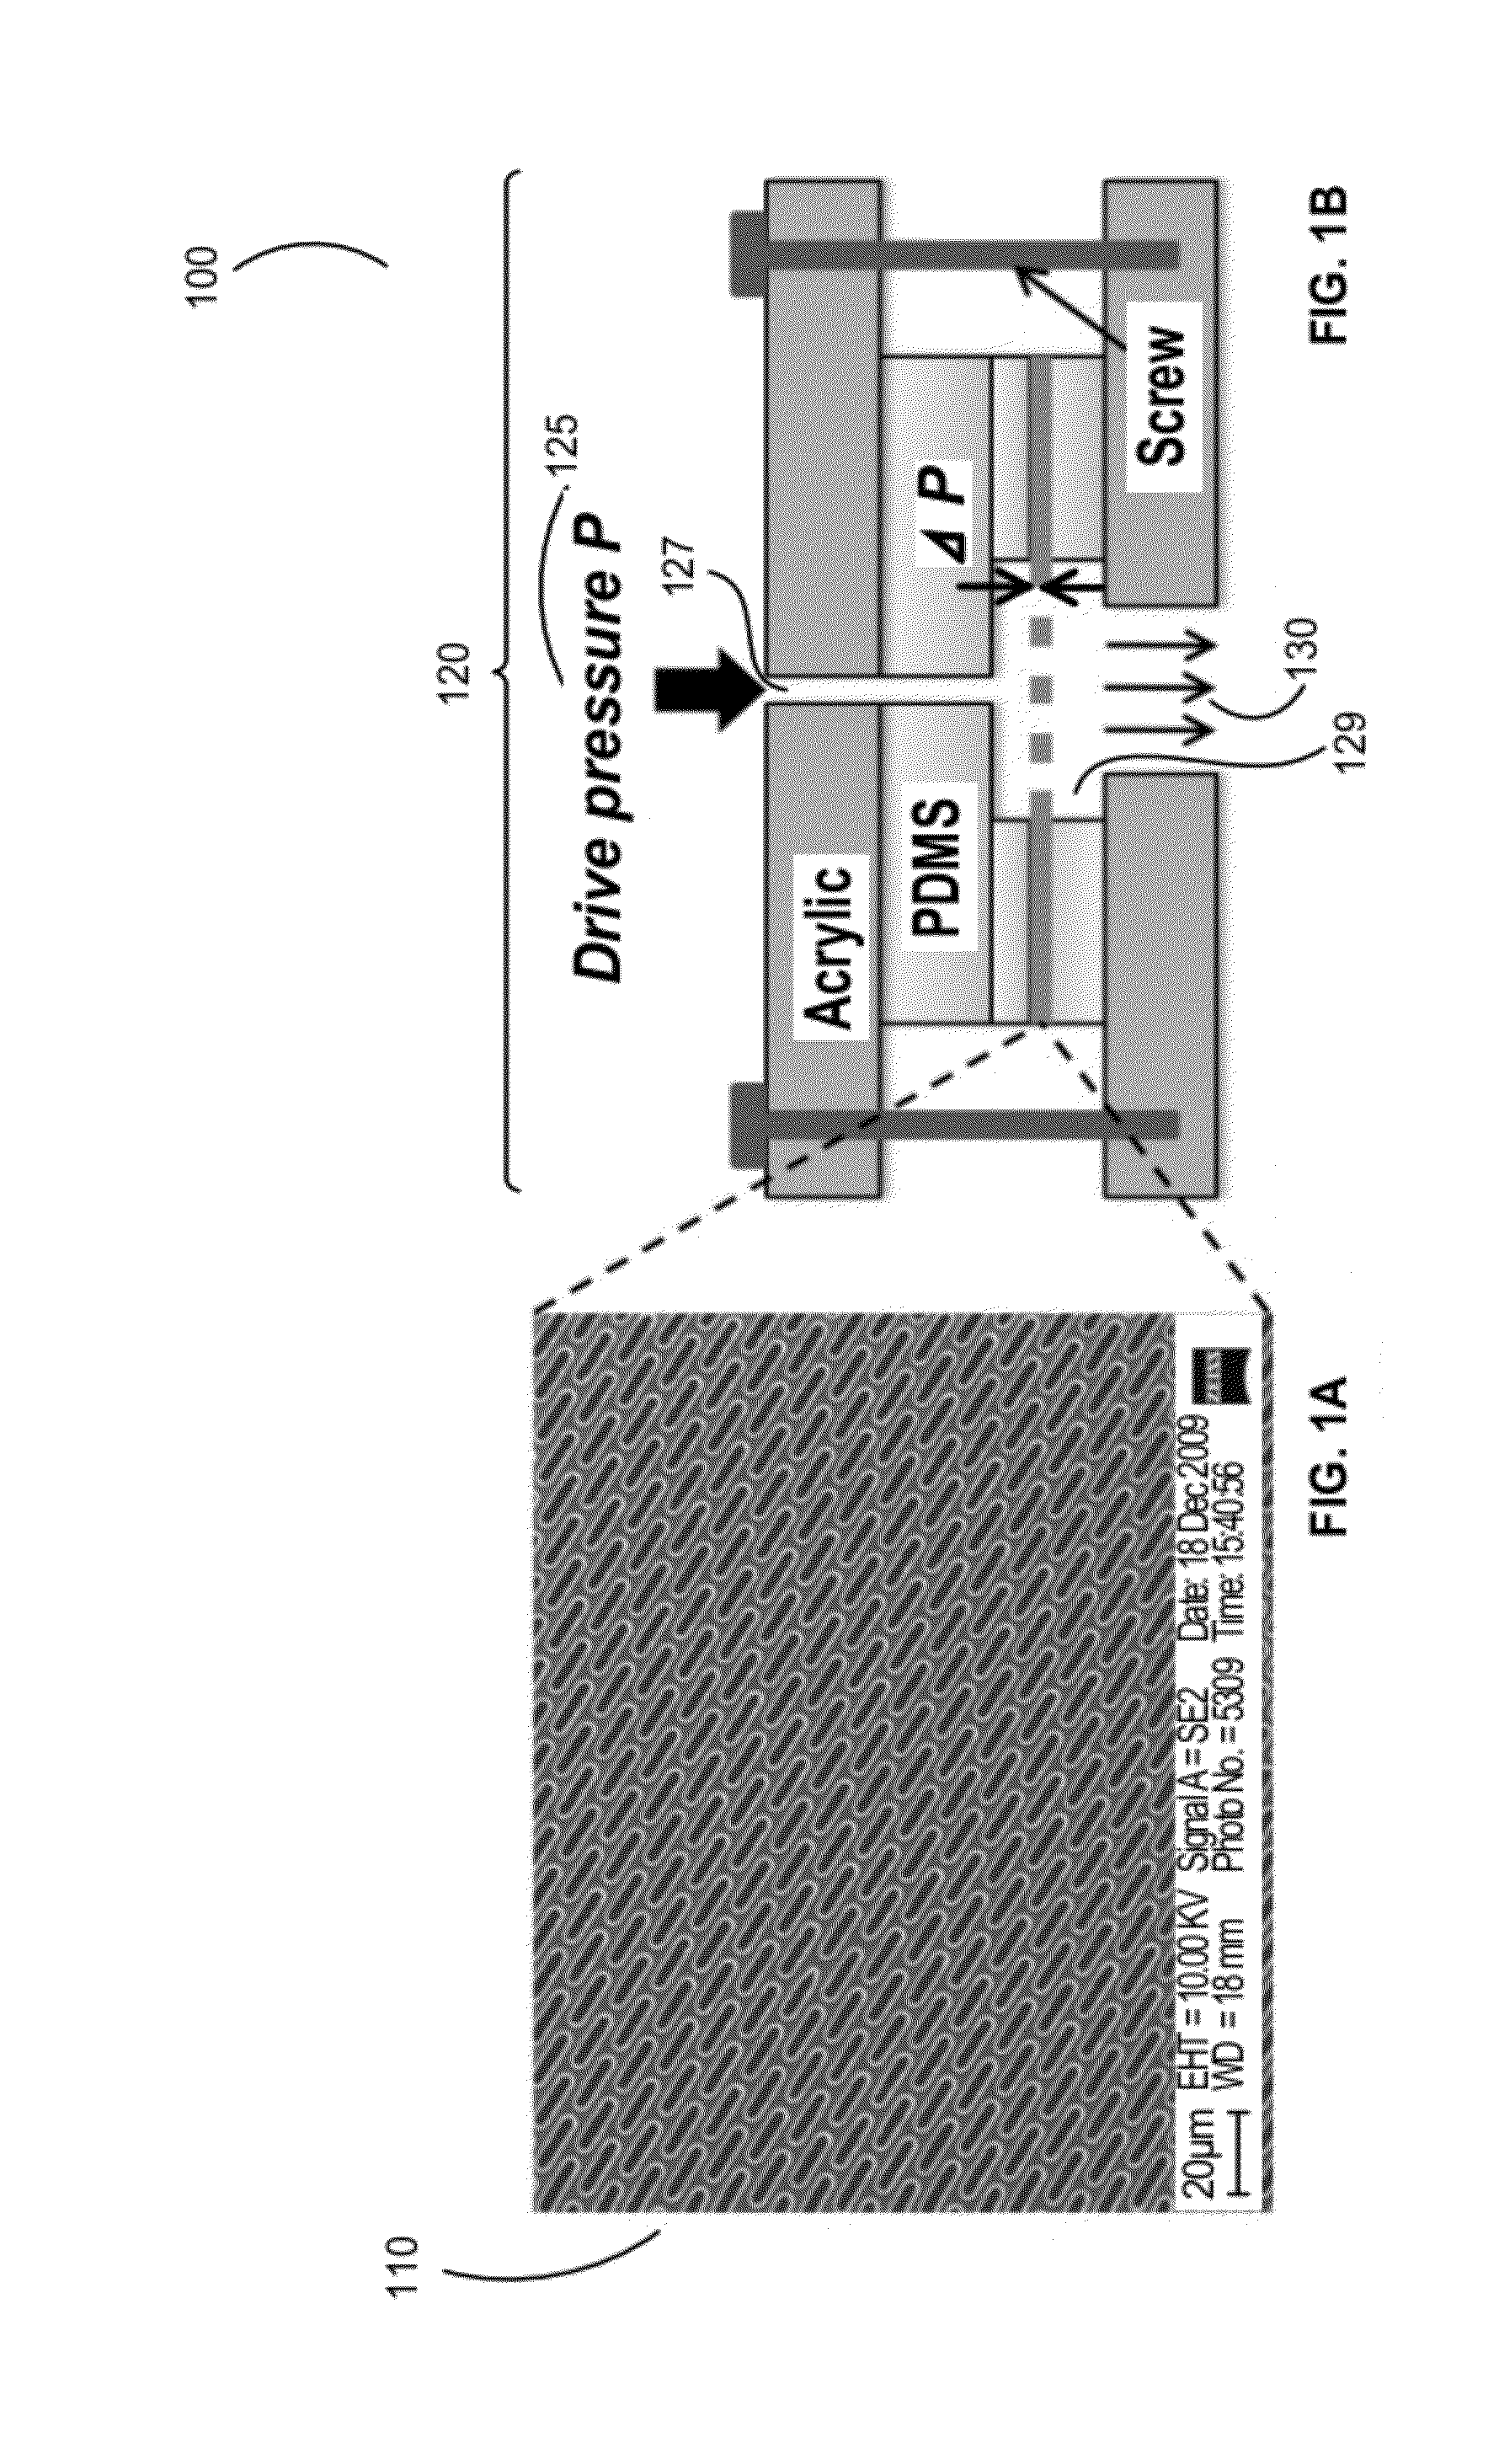 Methods and design of membrane filters